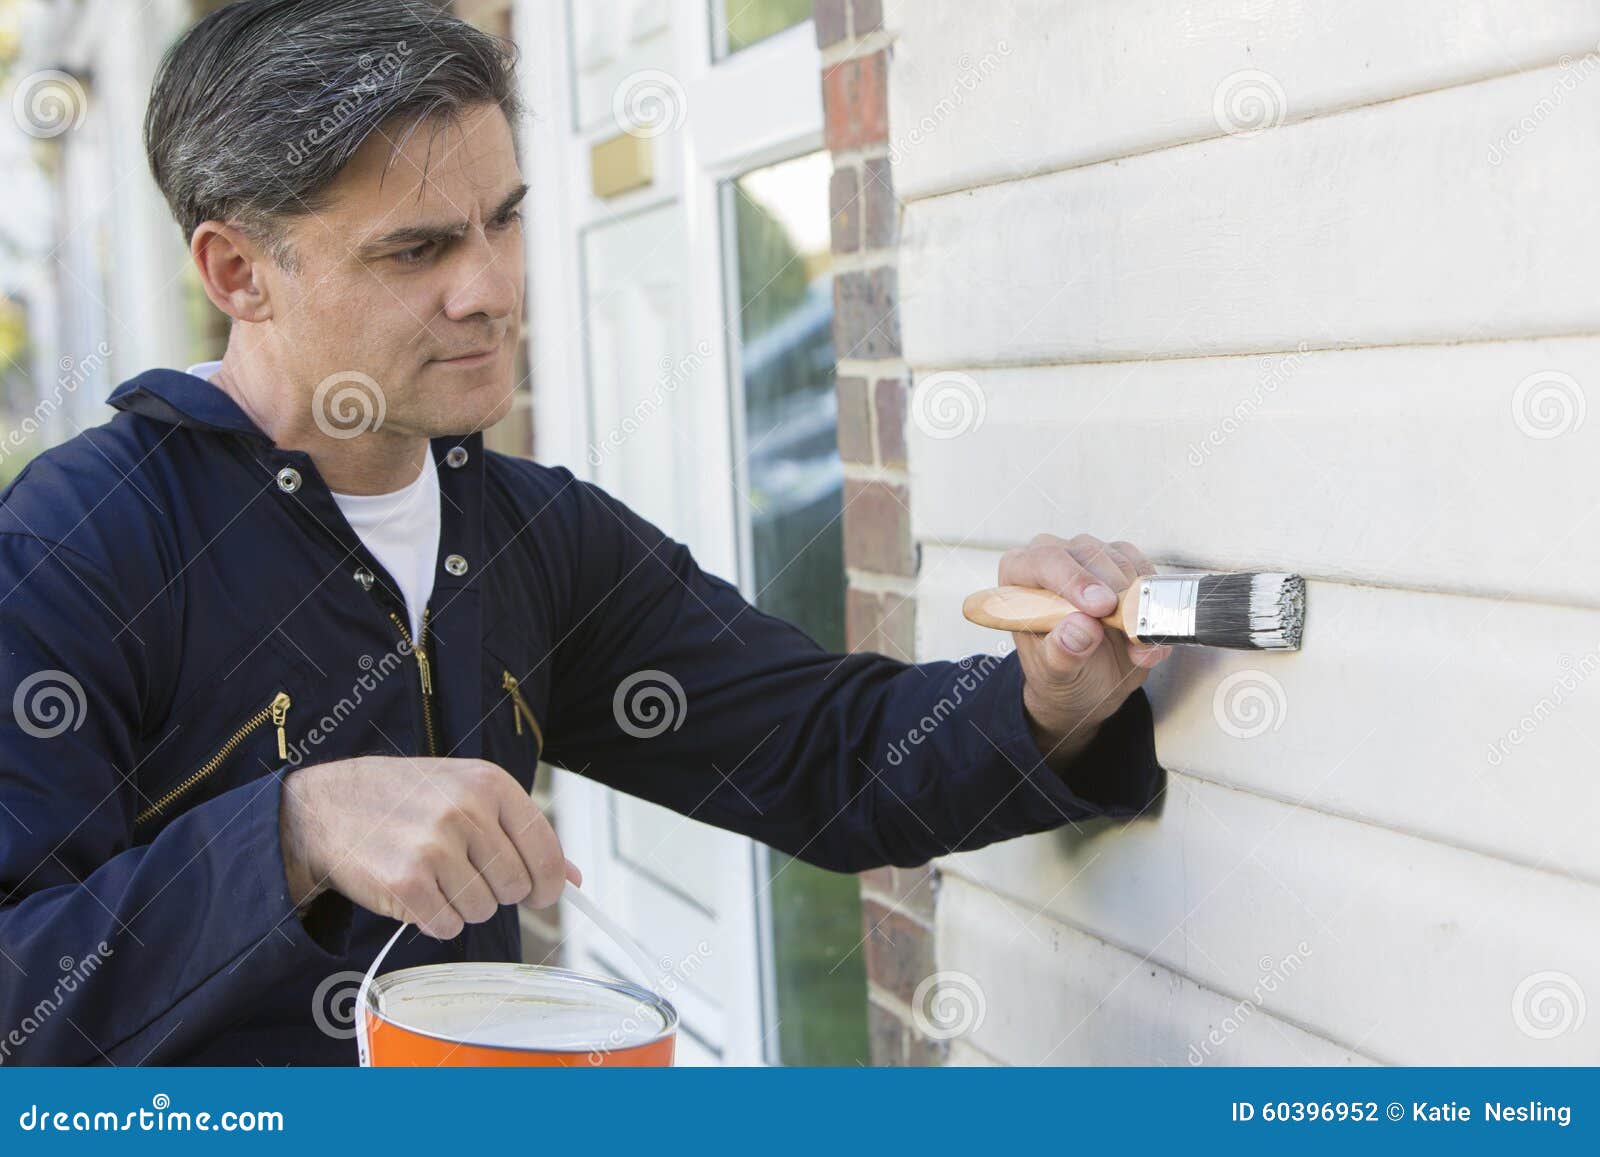 man holding brush and tin painting outside of house